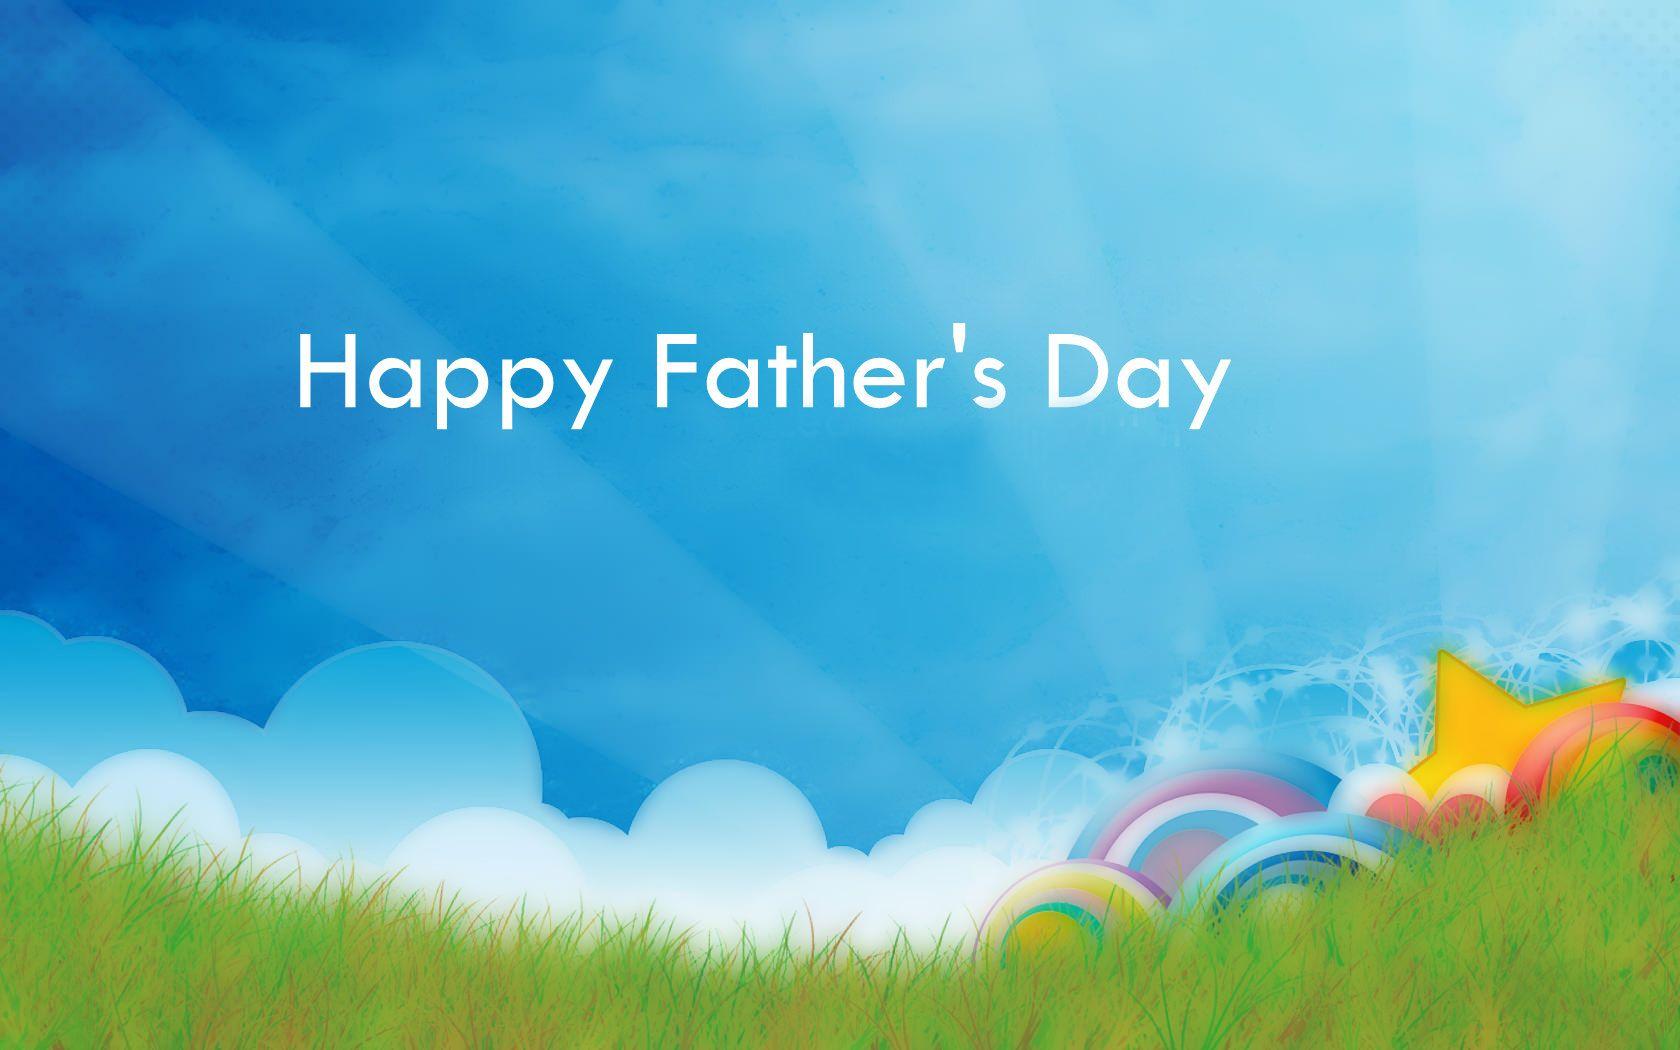 Father's Day wallpaper